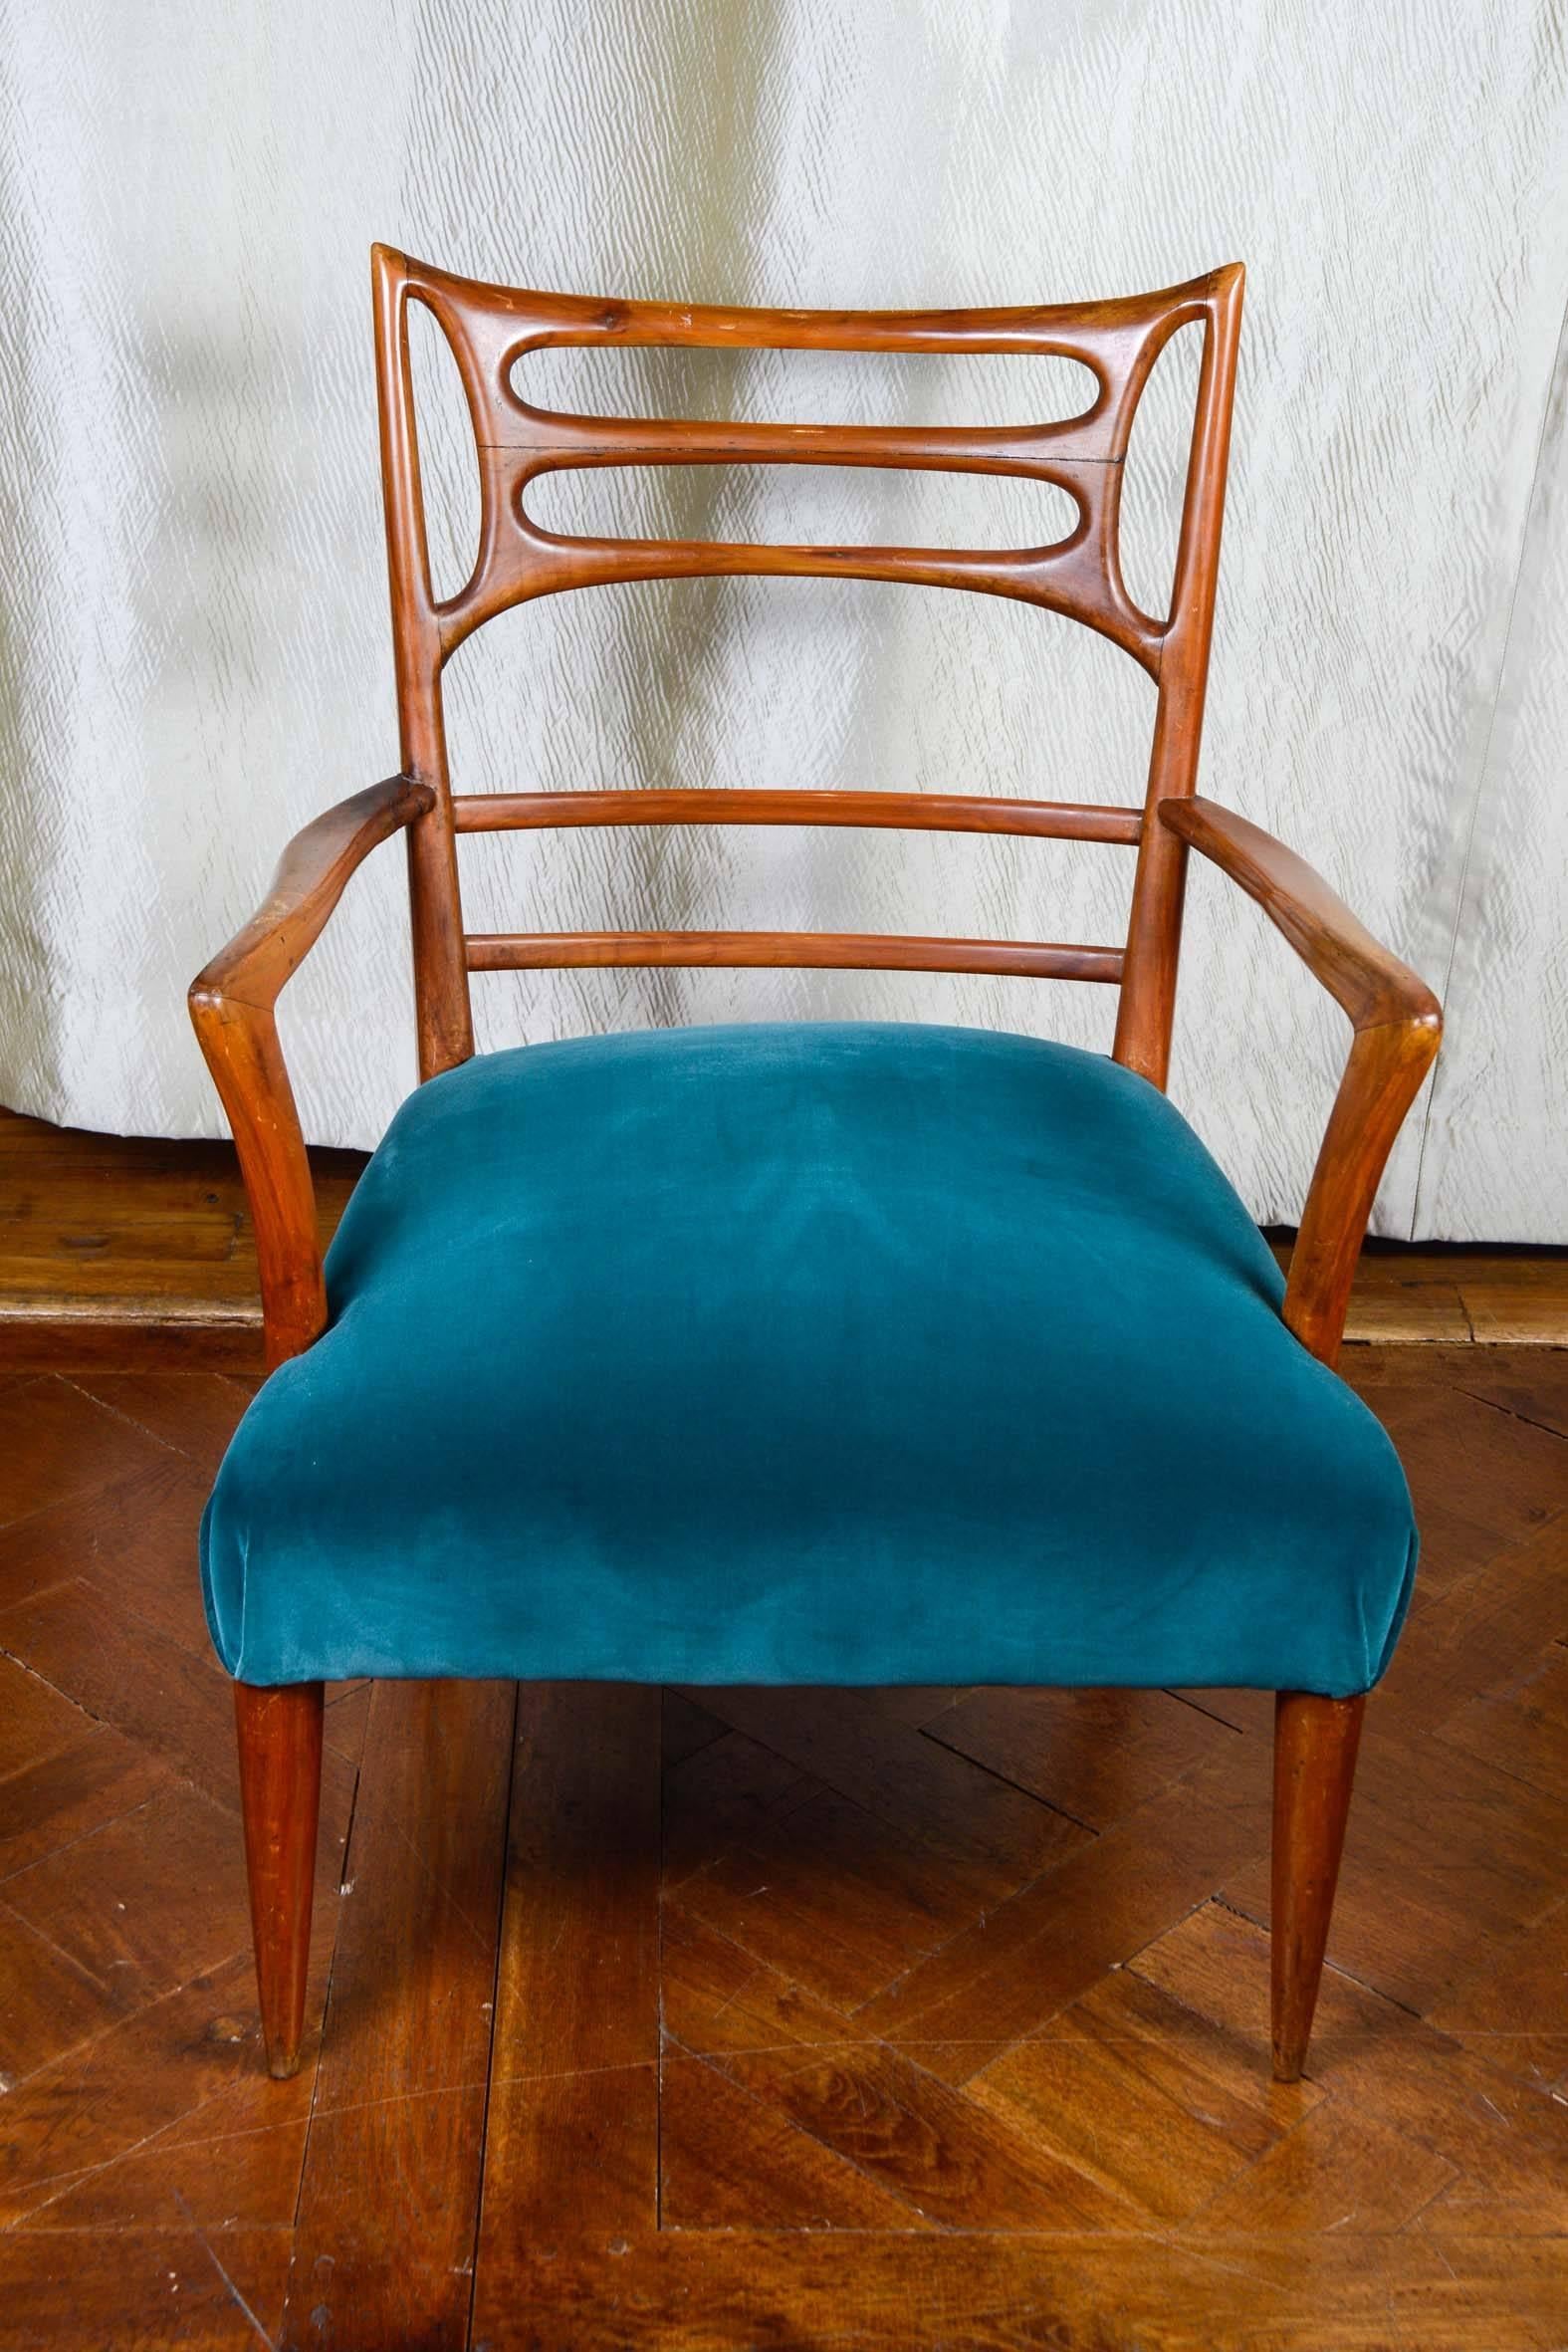 Pair of vintage armchairs, seat upholstered with blue velvet, sculpted back in wood.